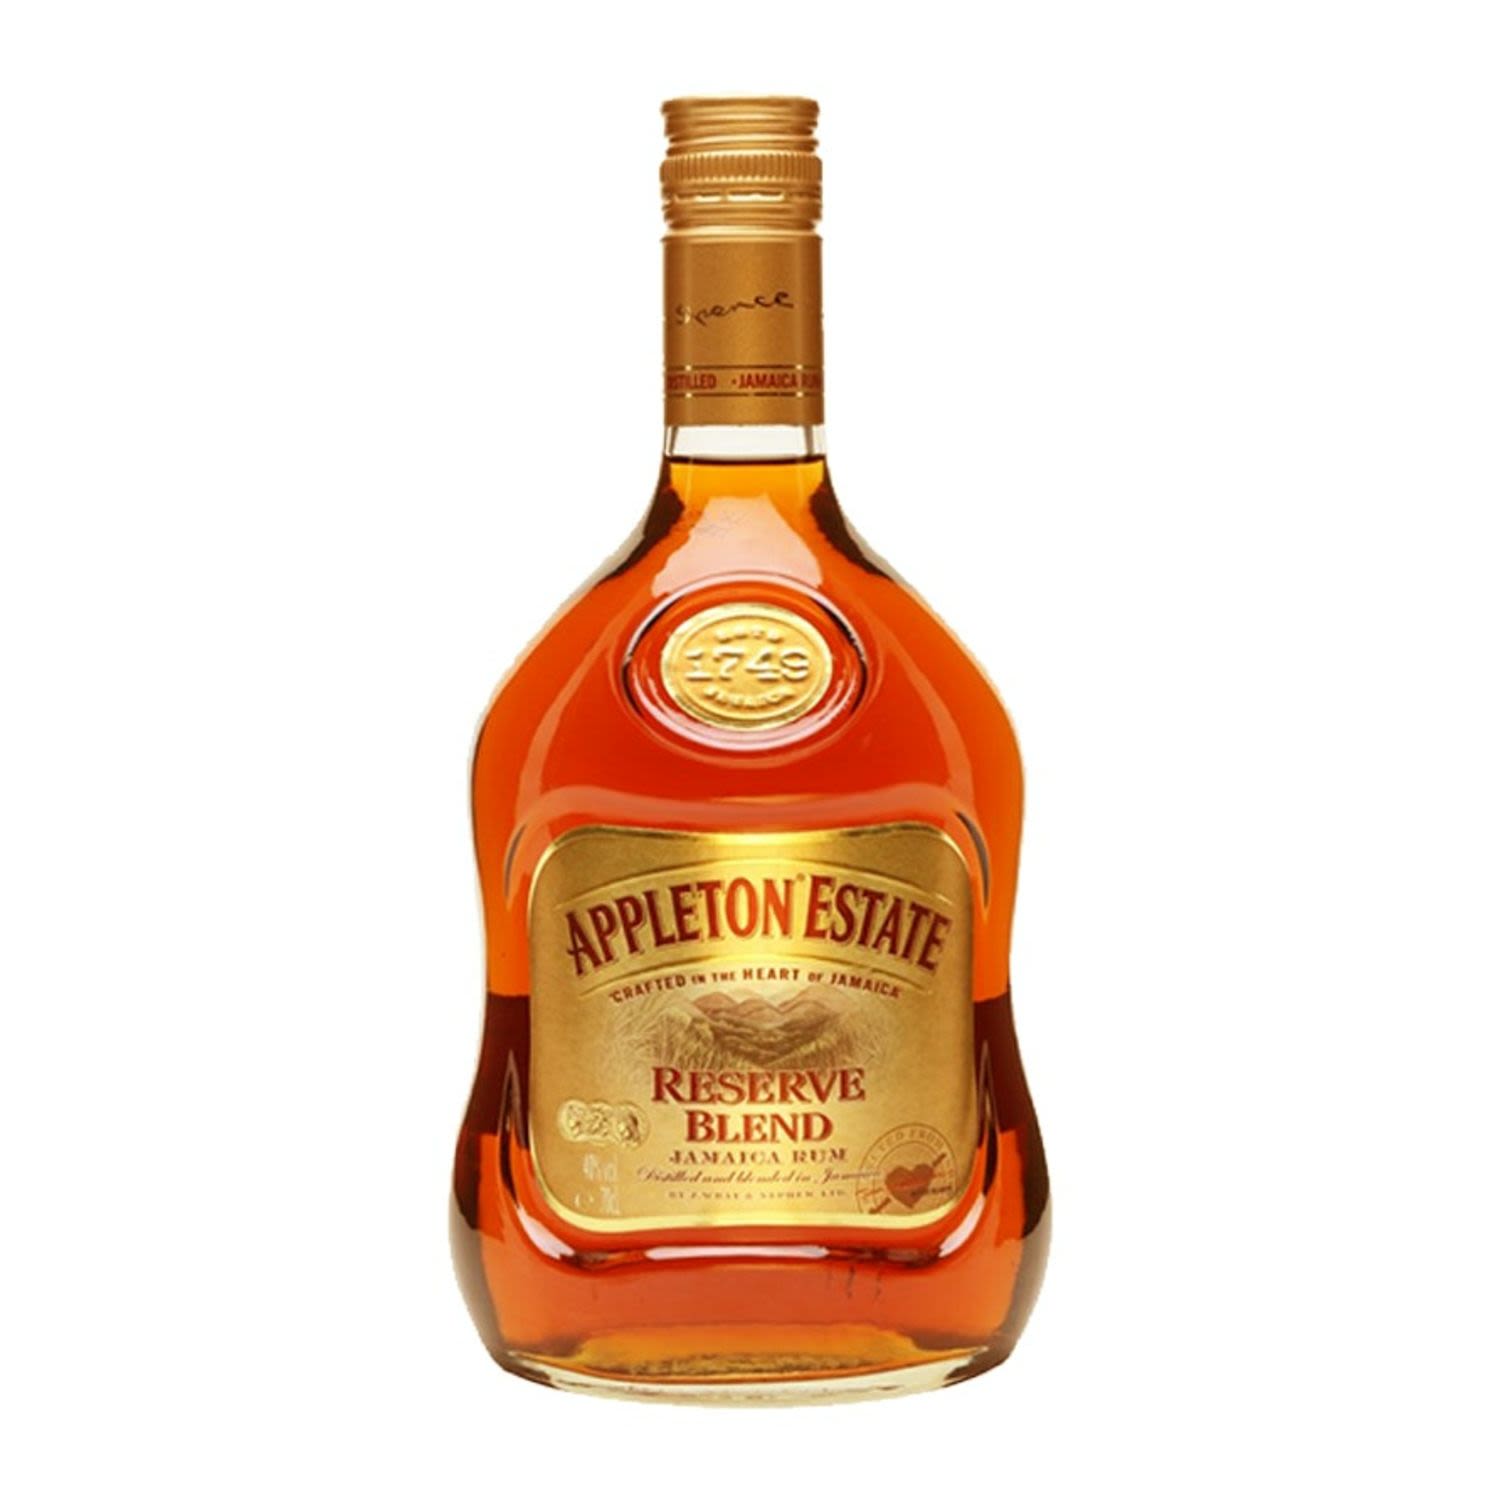 A beautifully smooth, full-bodied rum. The palate shows roasted nuts, spices, nutmeg, dried fruits and orange peel with a lick of vanilla on the finish.<br /> <br />Alcohol Volume: 43.00%<br /><br />Pack Format: Bottle<br /><br />Standard Drinks: 22</br /><br />Pack Type: Bottle<br /><br />Country of Origin: Jamaica<br />